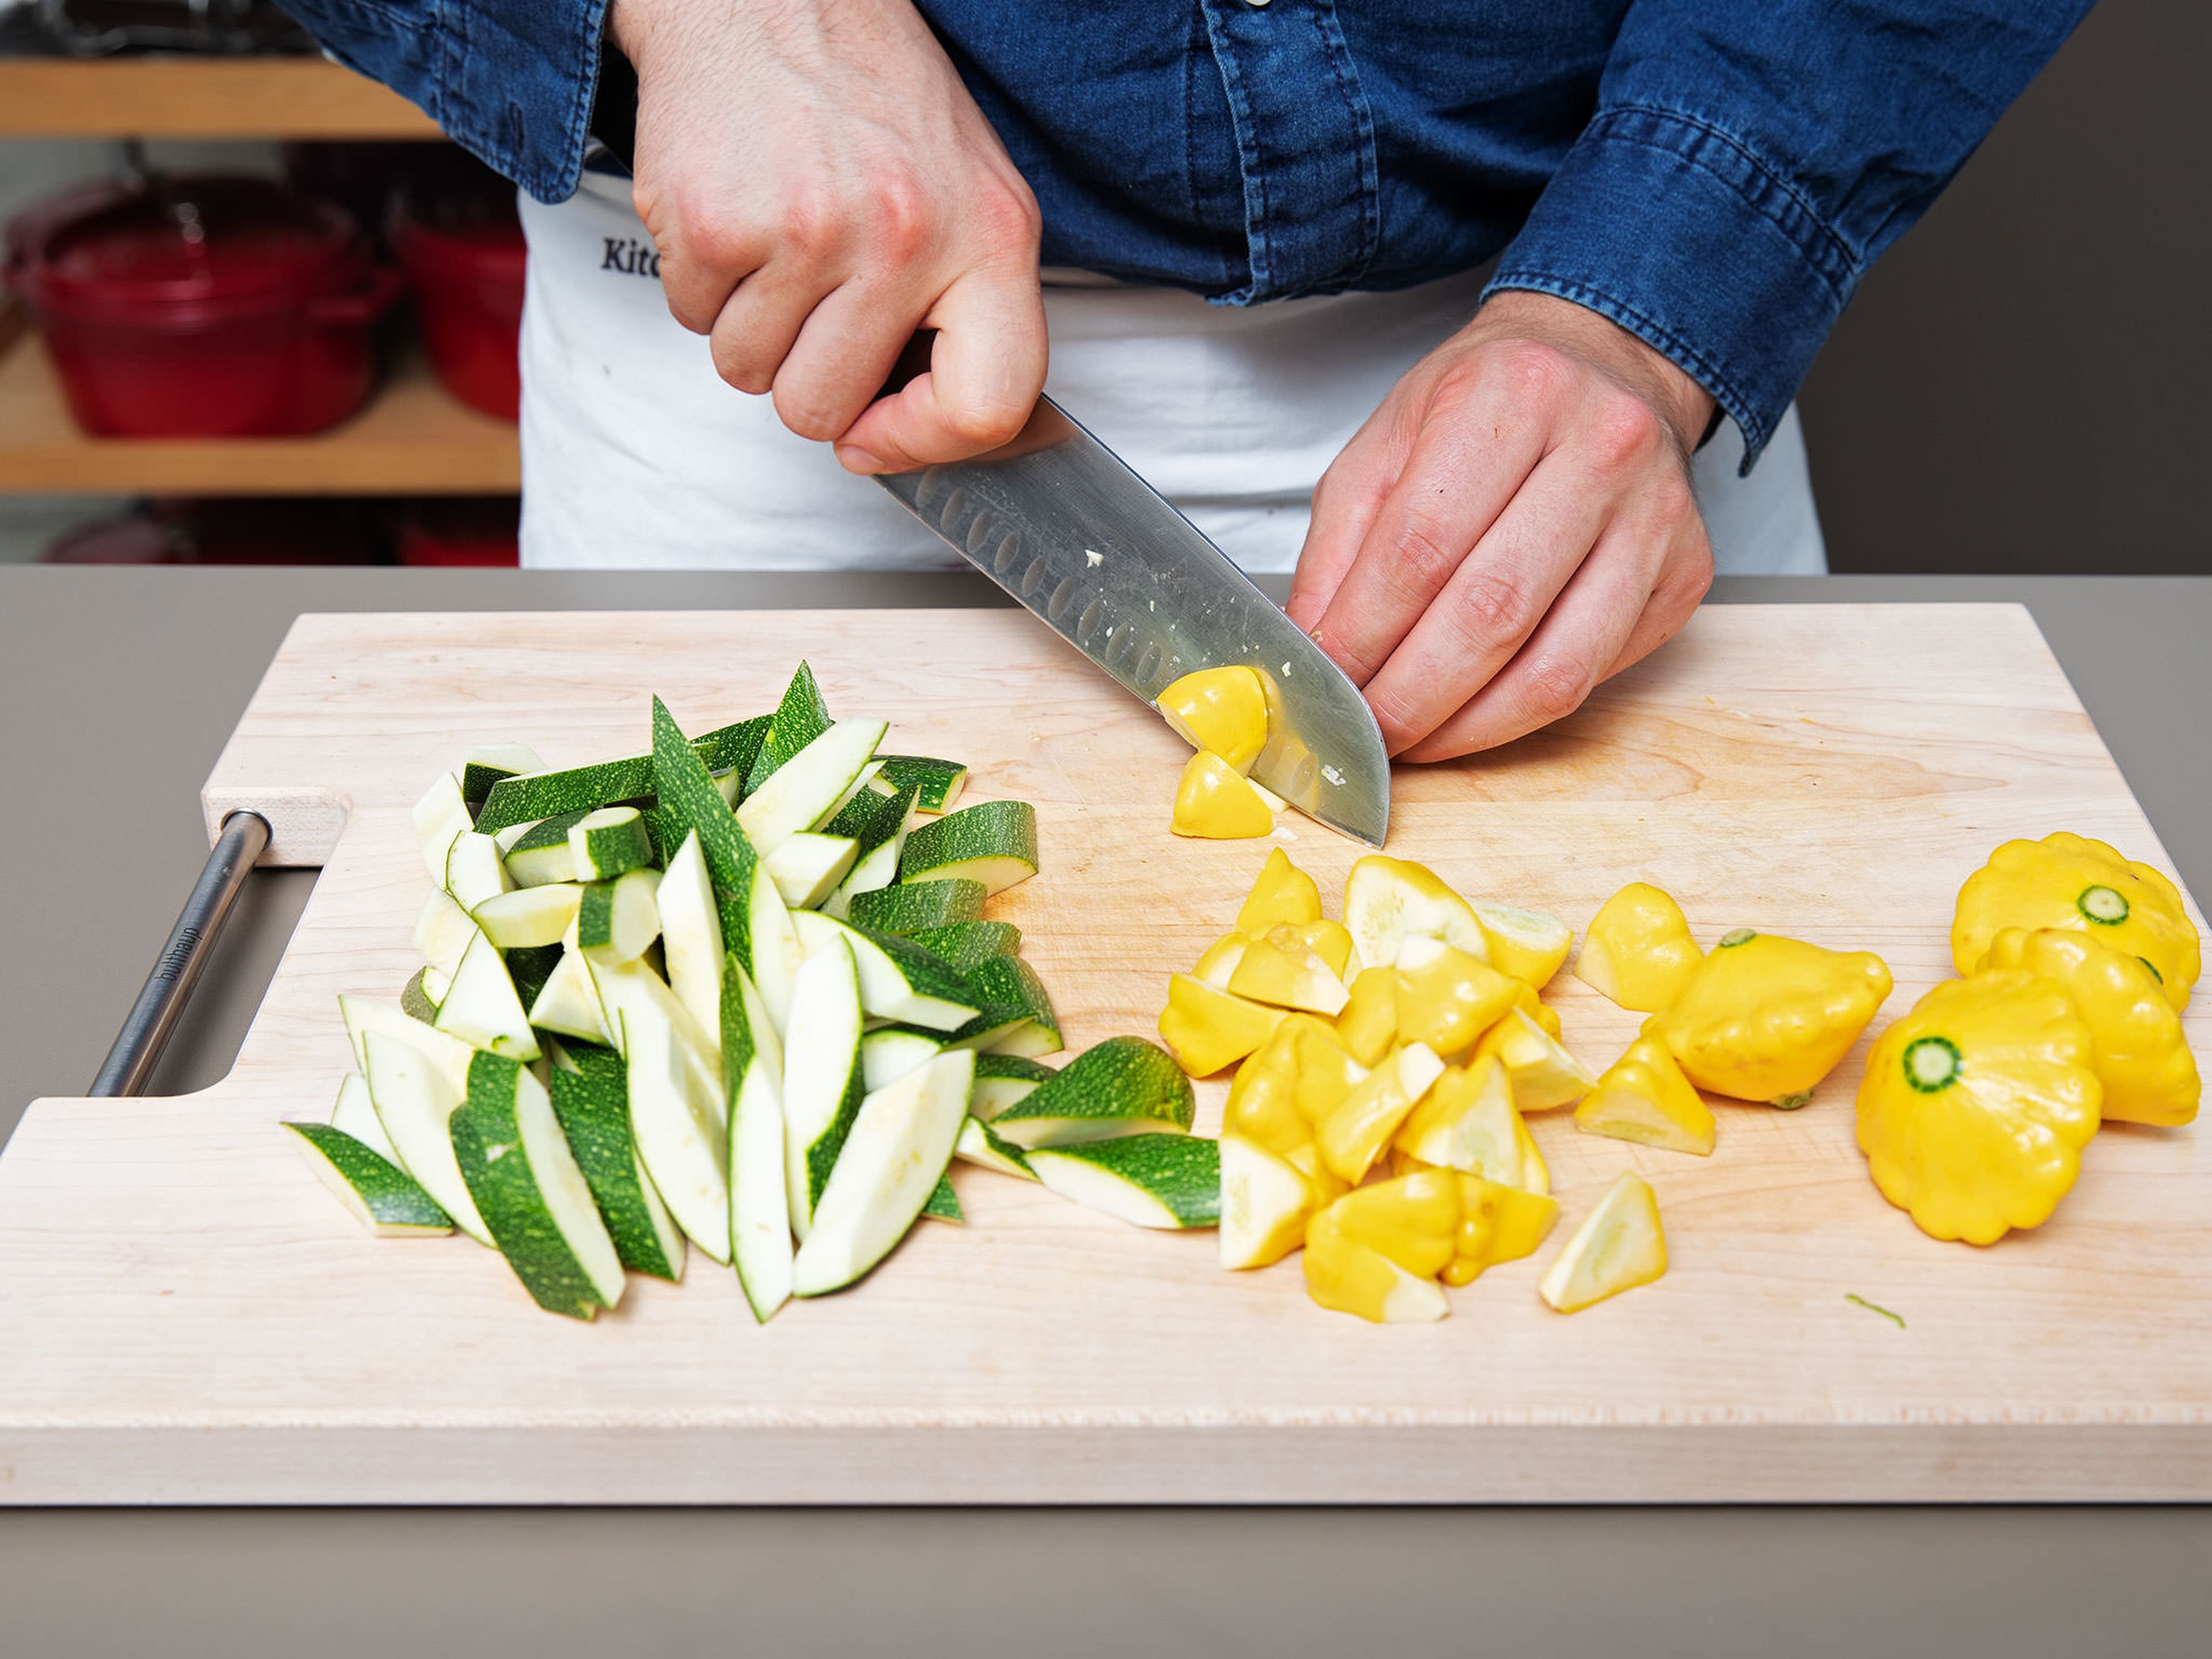 Preheat the oven to 160°C/320°F. Slice summer squash and zucchini and add to a baking dish along with cherry tomatoes.